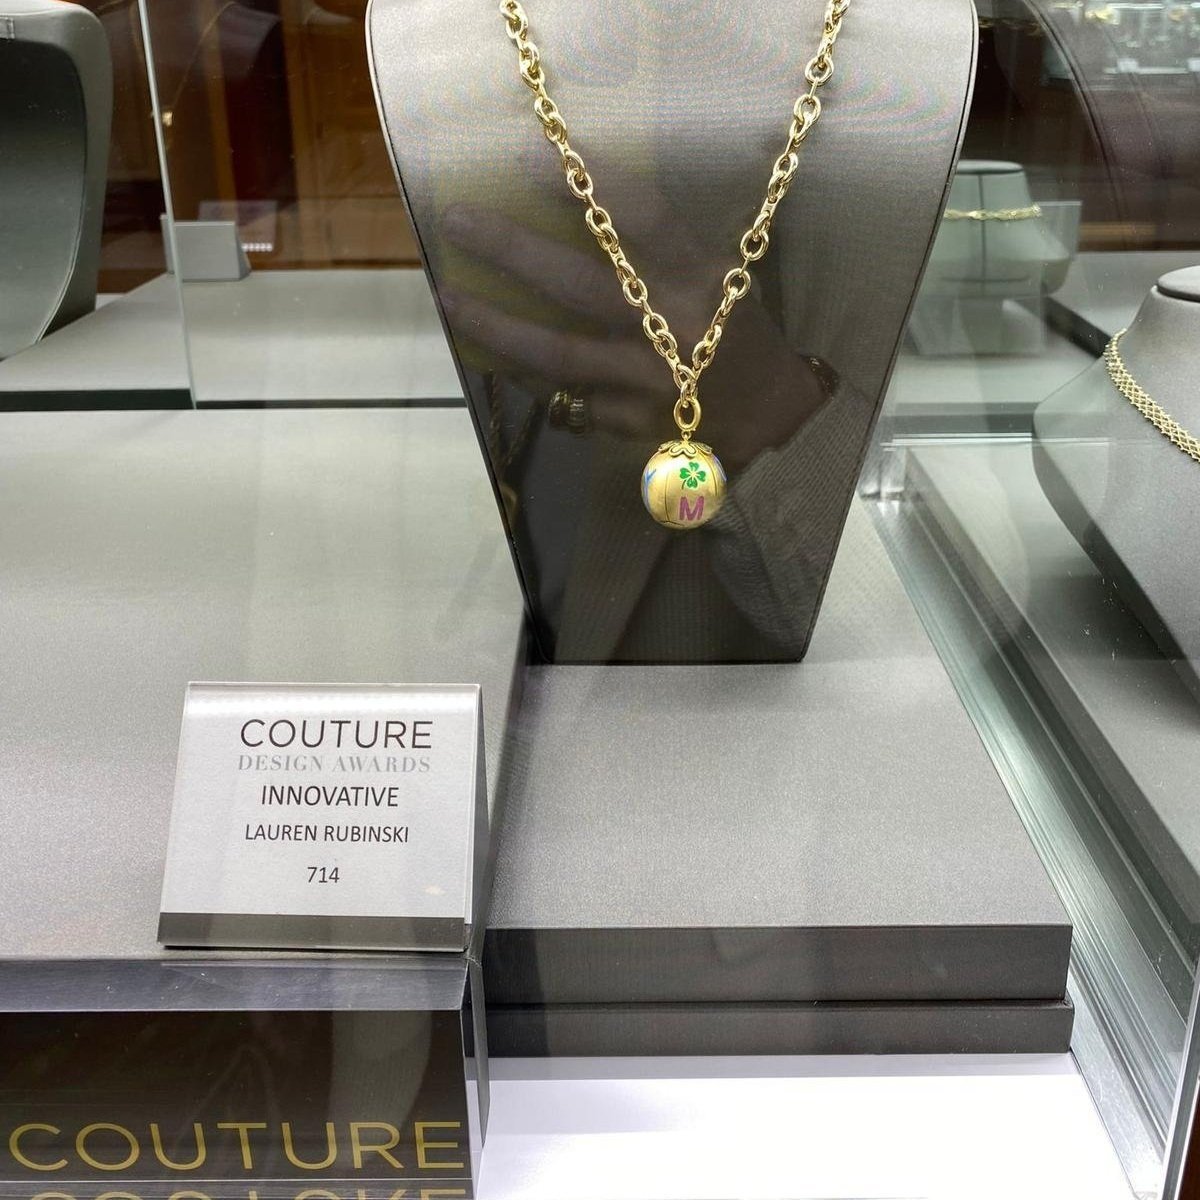 Lauren's jewelry was nominated for the Couture 2023 Innovation award